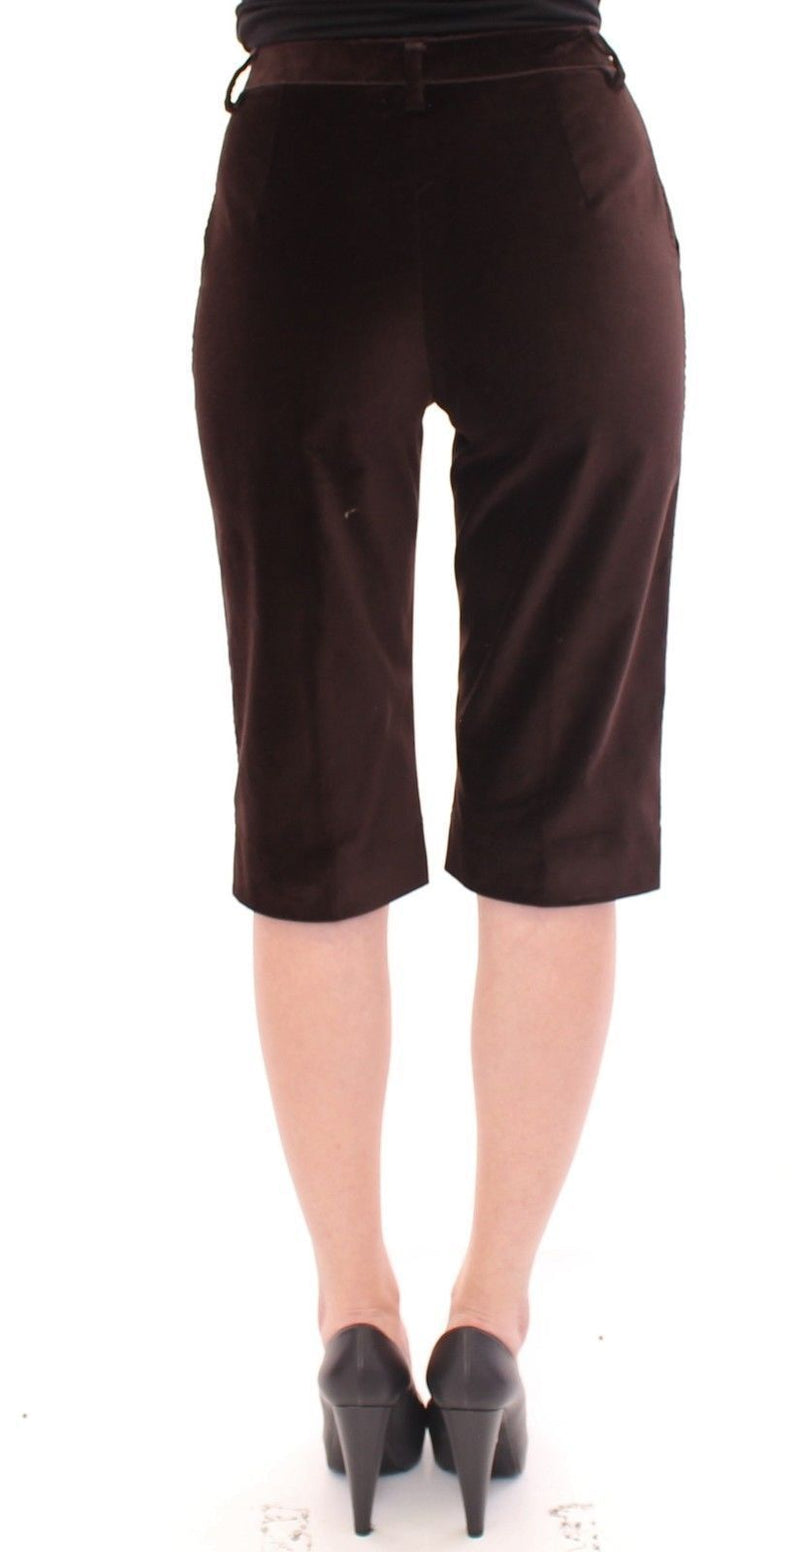 Brown Cotton Solid Pattern Shorts Pants